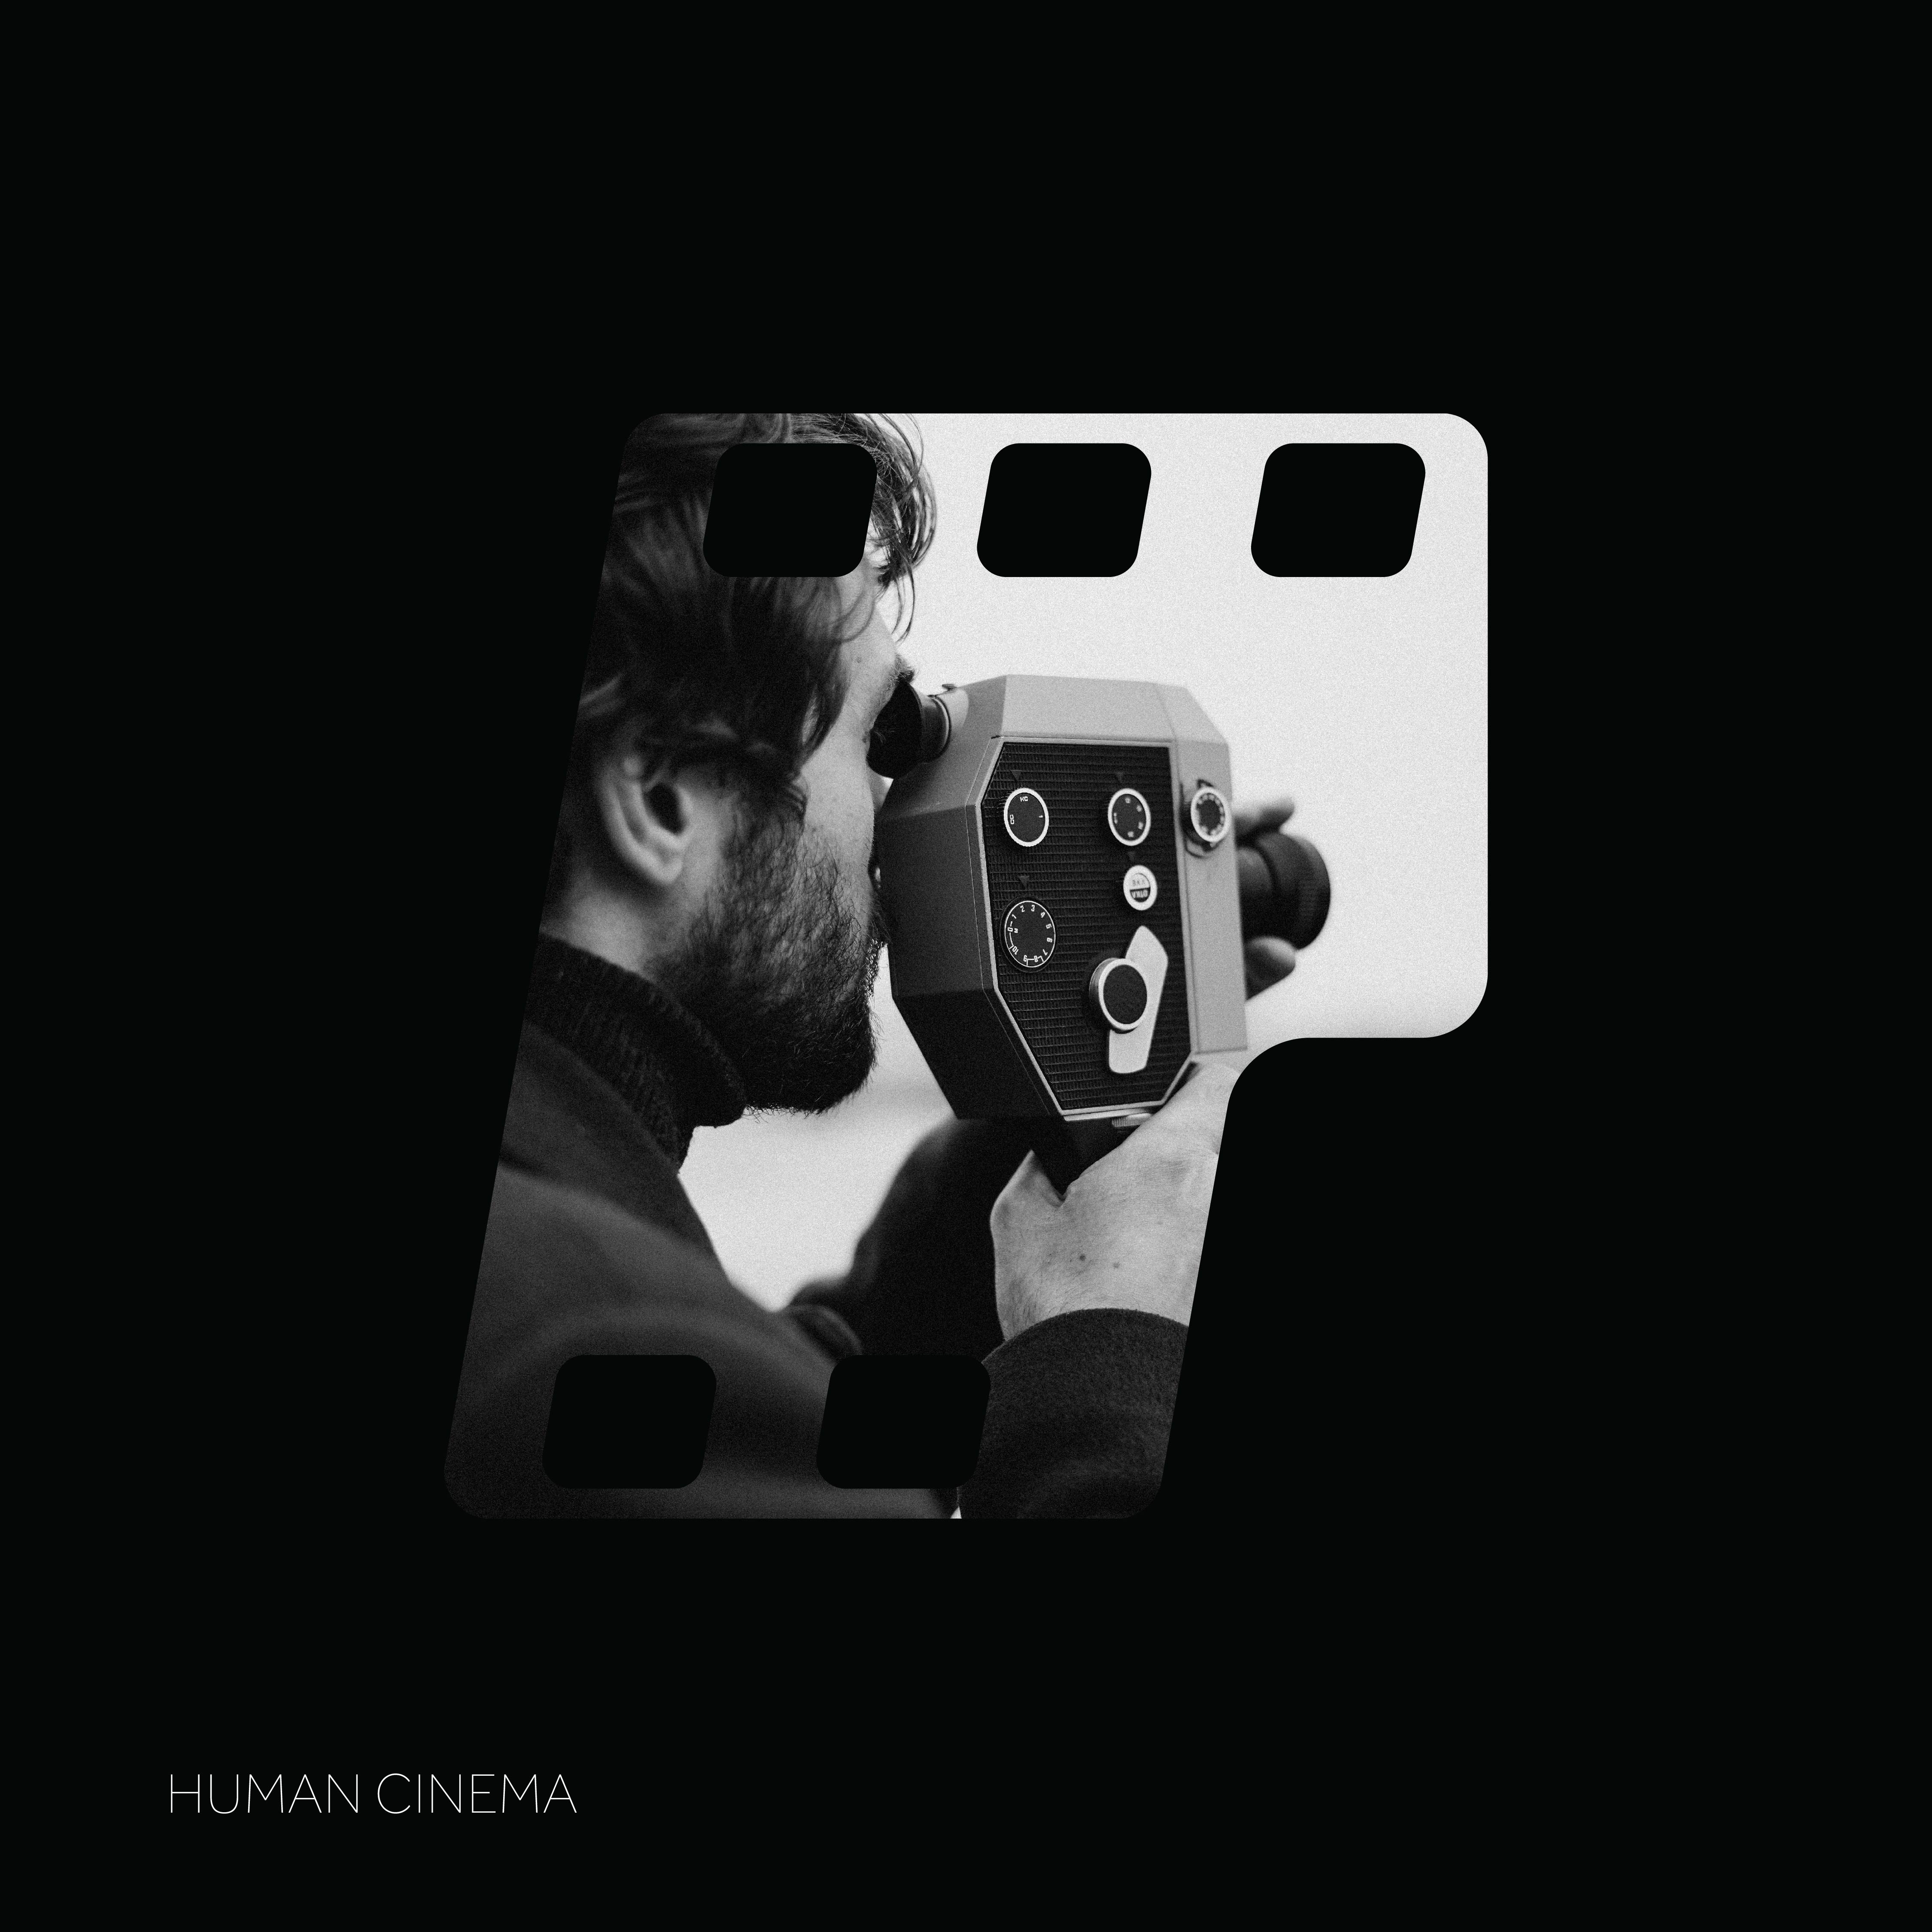 Human Cinema: A Professional and Elegant Logo for the Film Industry